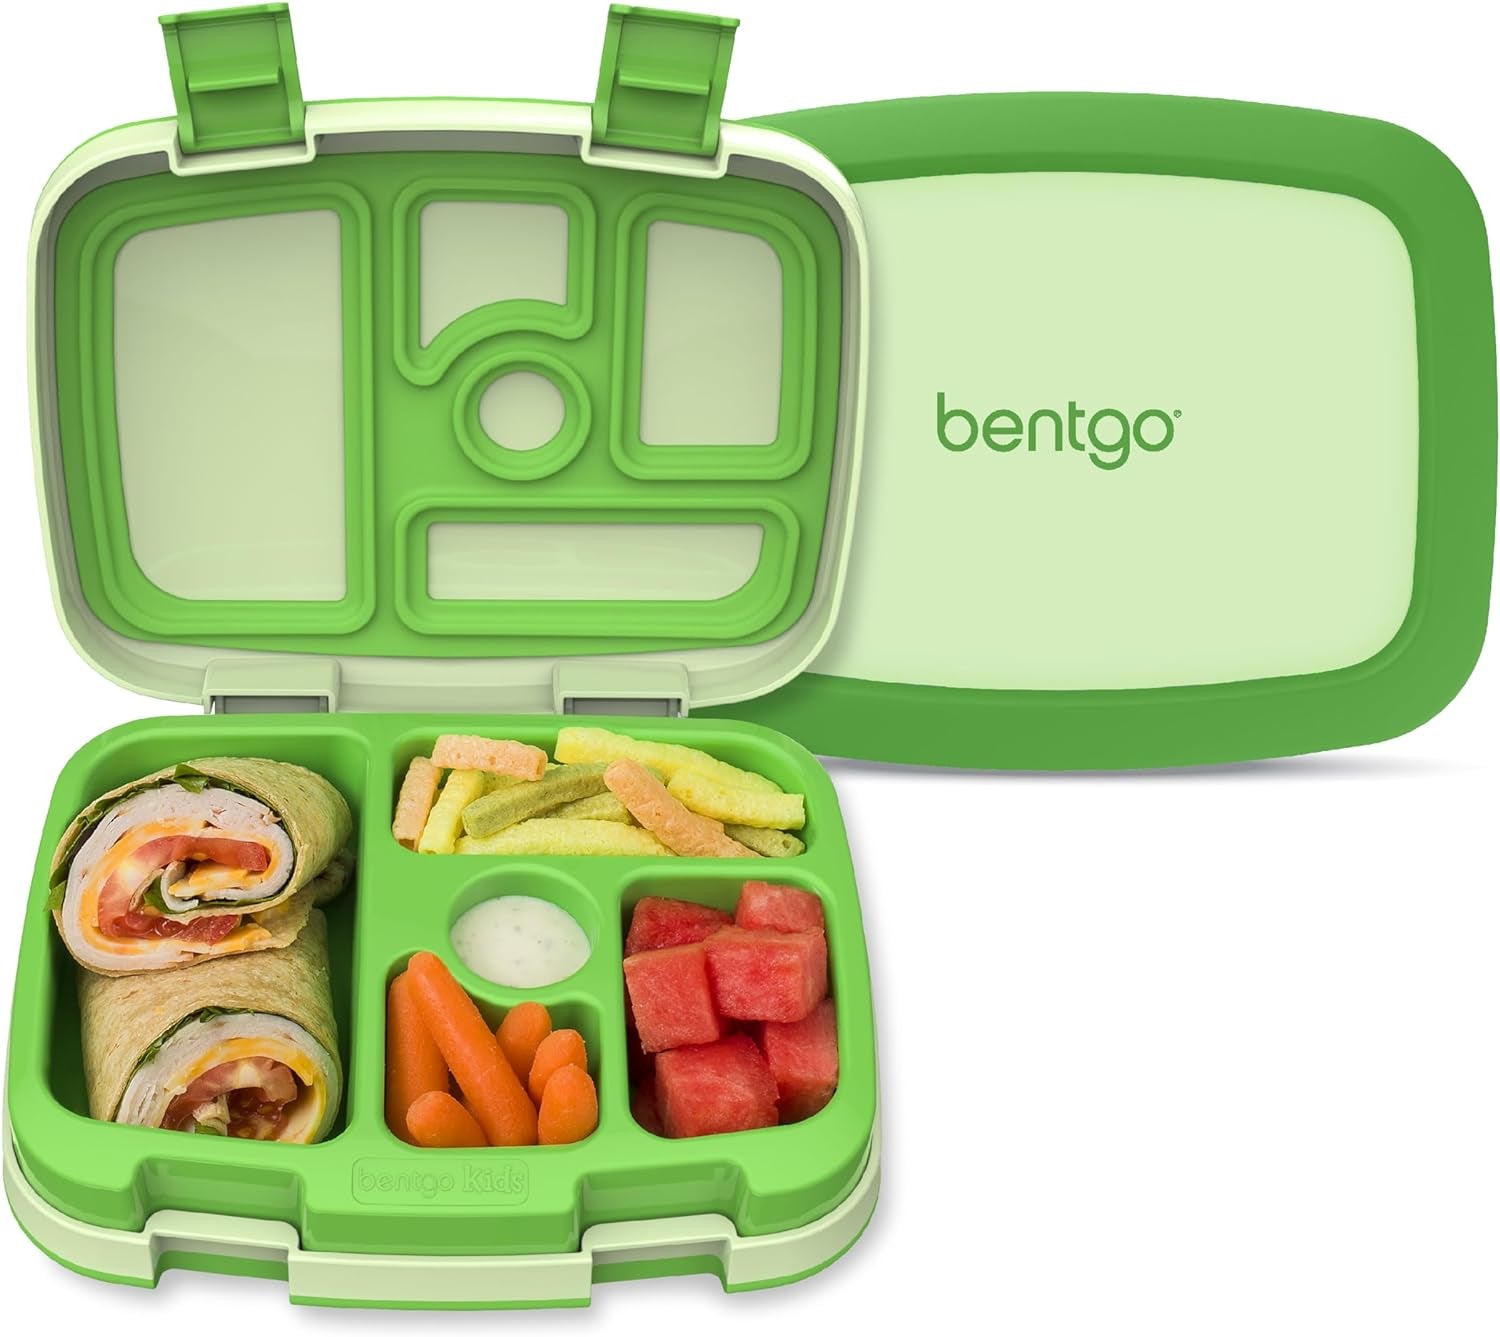 ® Kids Bento-Style 5-Compartment Leak-Proof Lunch Box - Ideal Portion Sizes for Ages 3 to 7 - Durable, Drop-Proof, Dishwasher Safe, Bpa-Free, & Made with Food-Safe Materials (Blue)